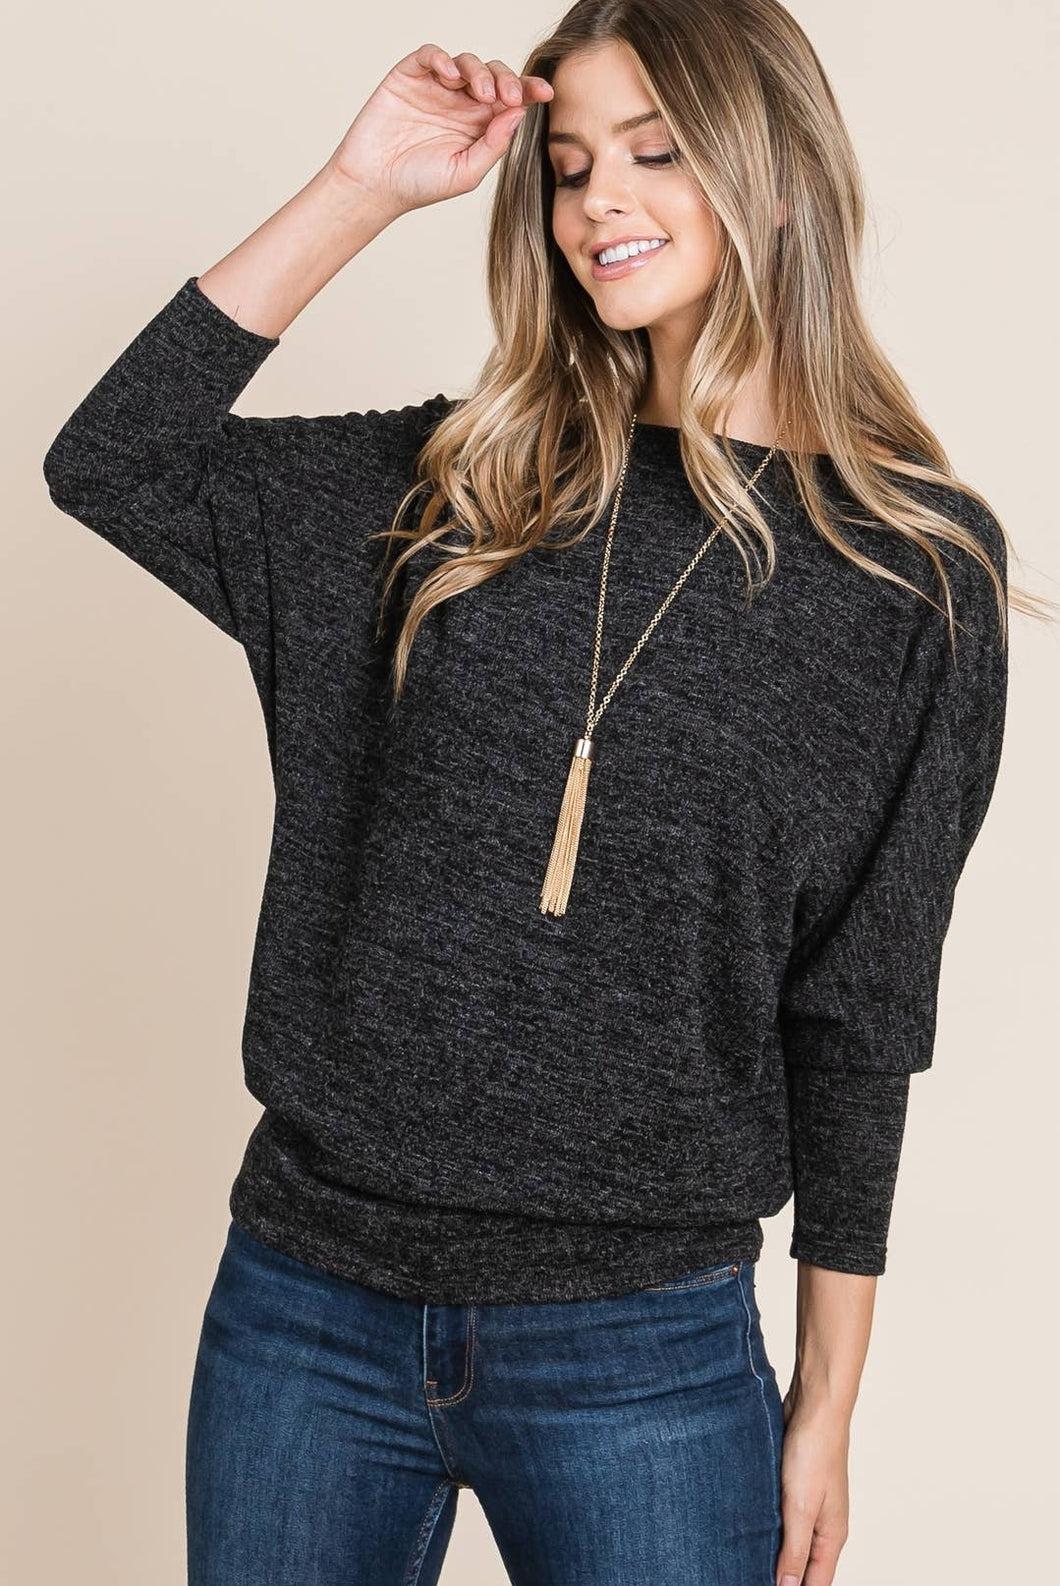 Black Relaxed Fit Knit Top